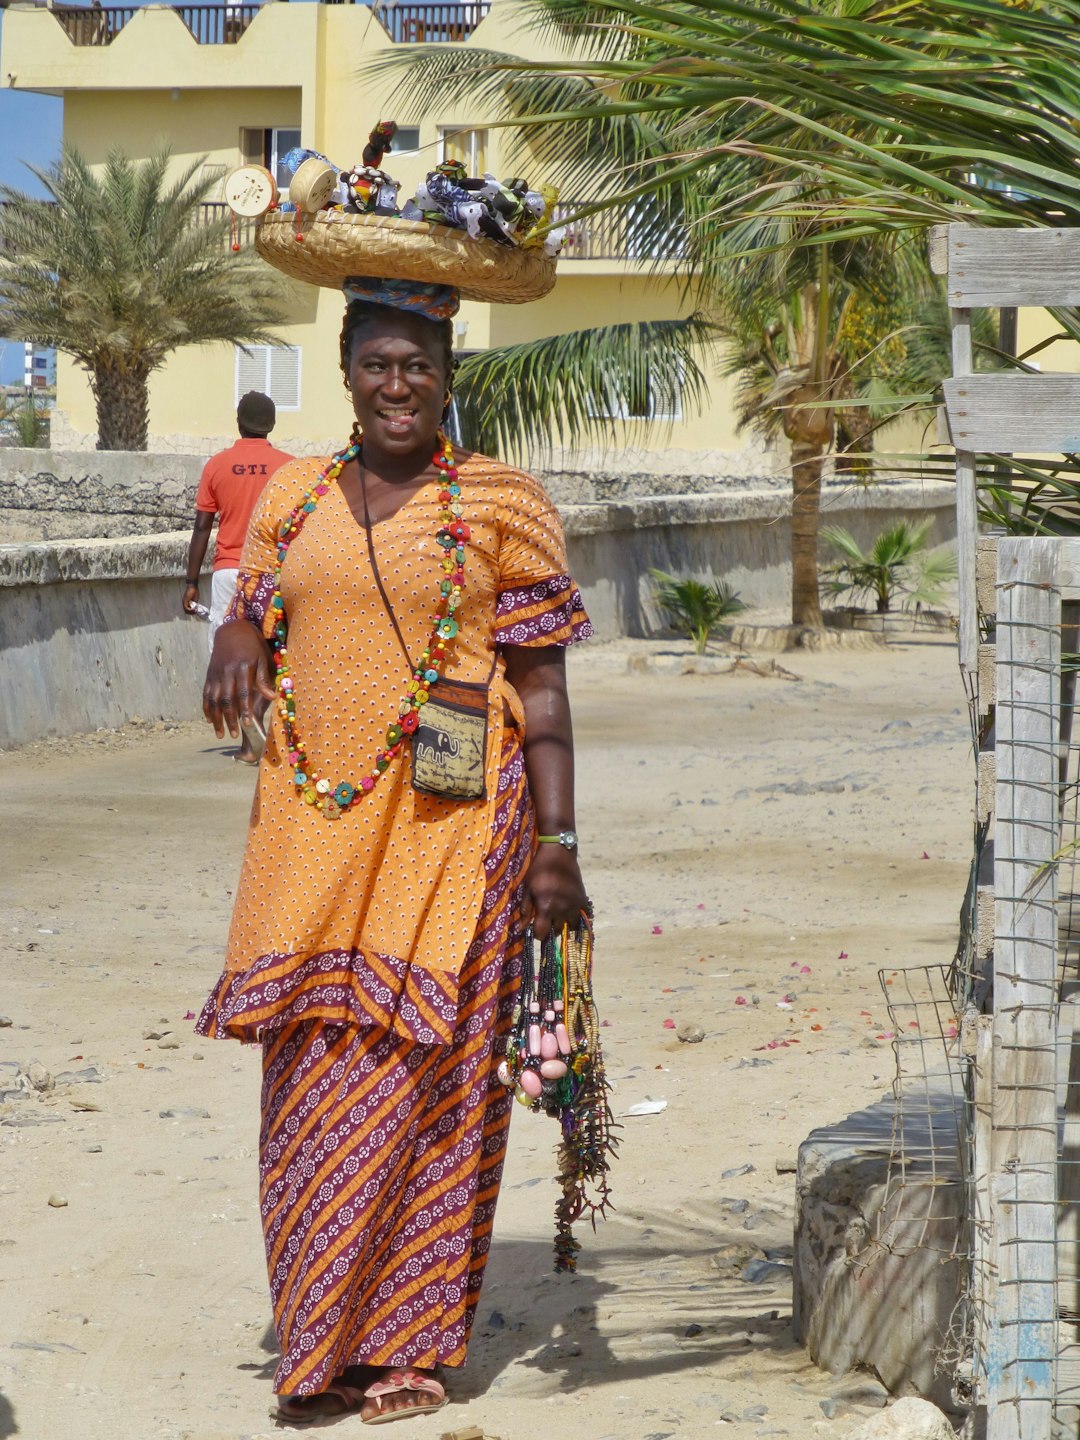 travelers stories about Temple in Boa Vista, Cape Verde